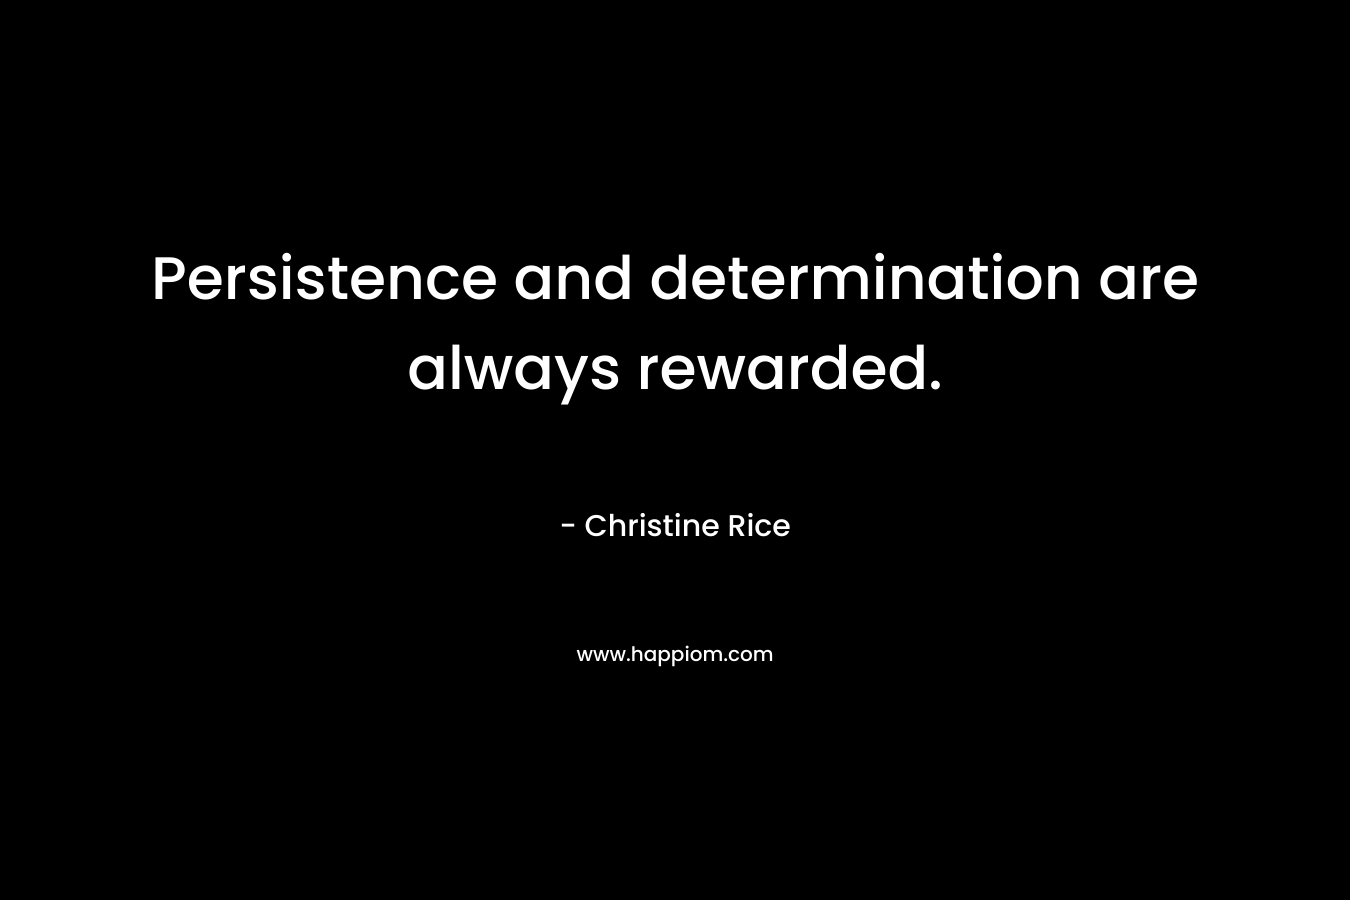 Persistence and determination are always rewarded. – Christine Rice